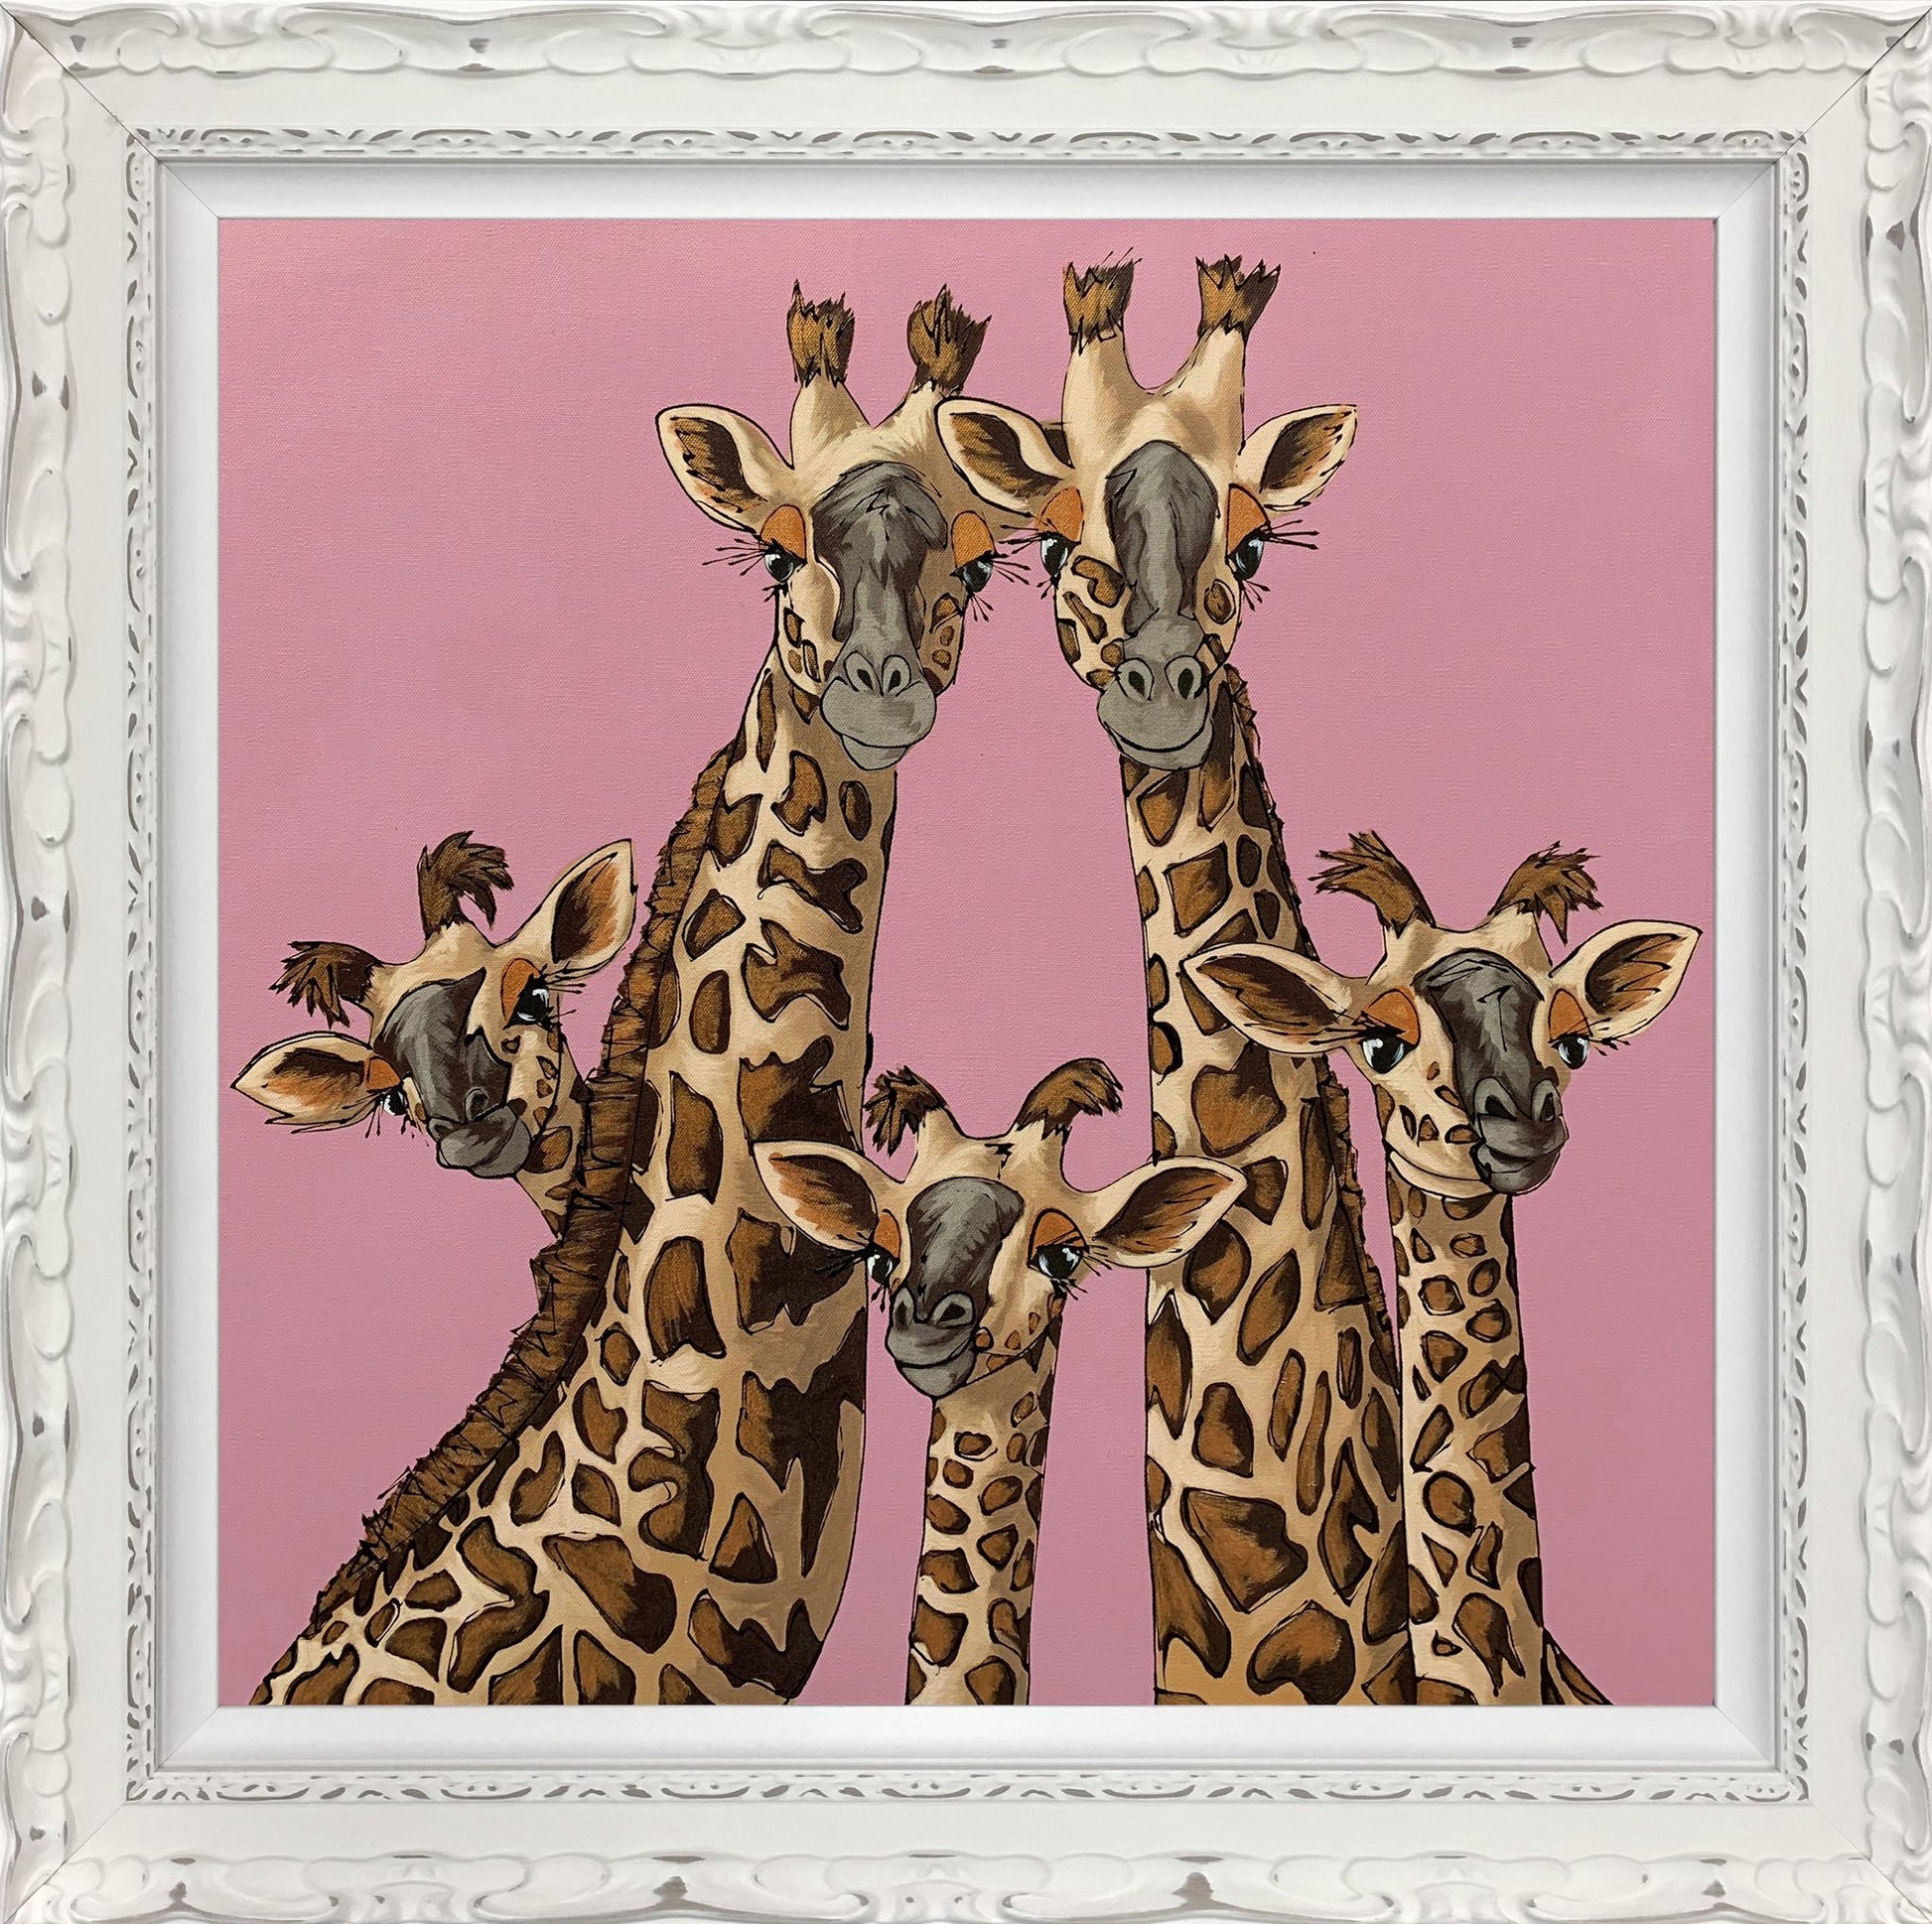 High Five limited edition print by Amy Louise